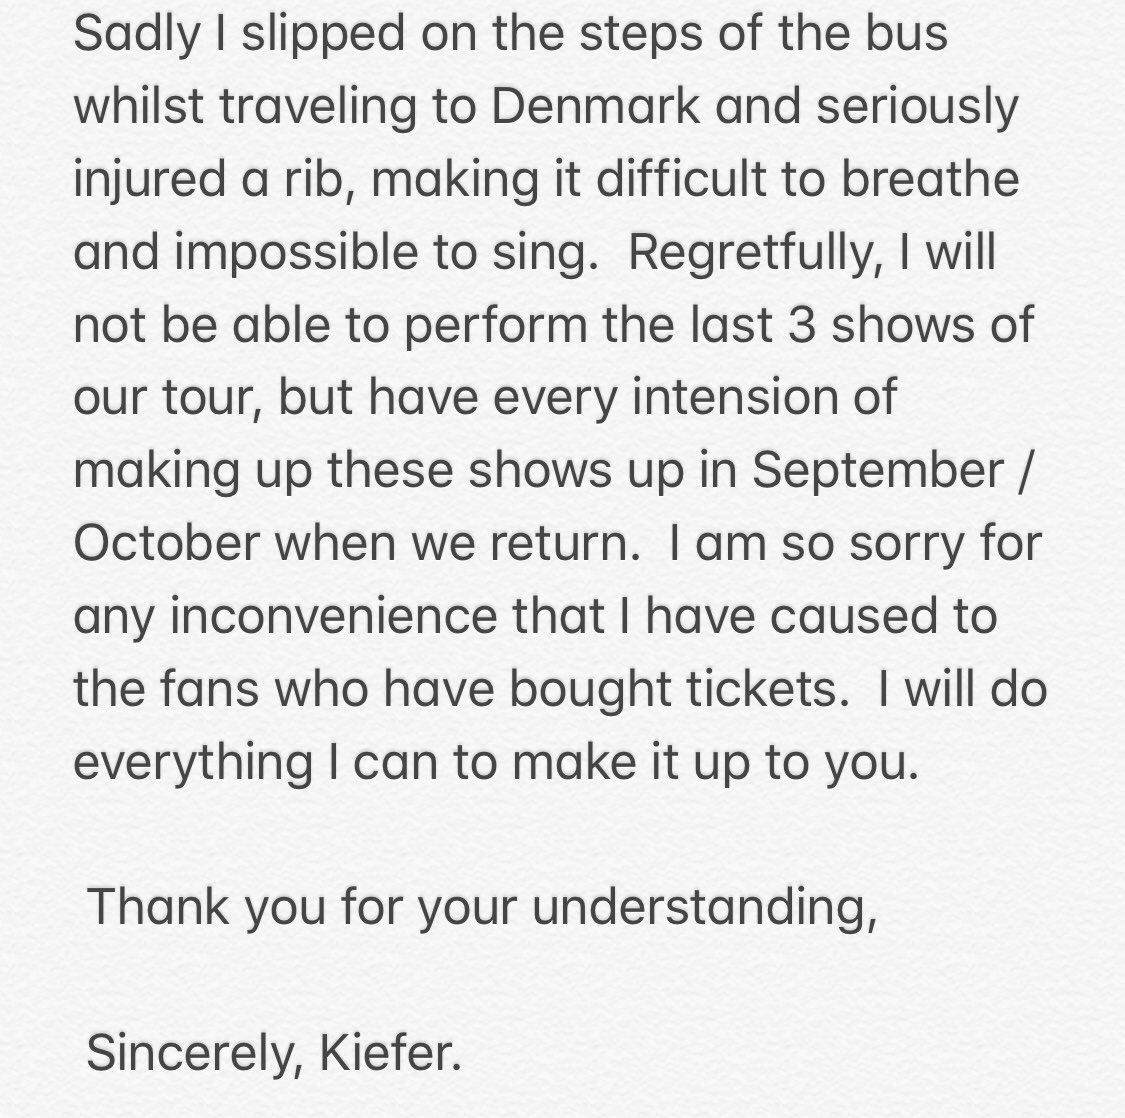 ANNOUNCEMENT: Make up dates in September to be announced shortly. My sincere apologies, Kiefer 